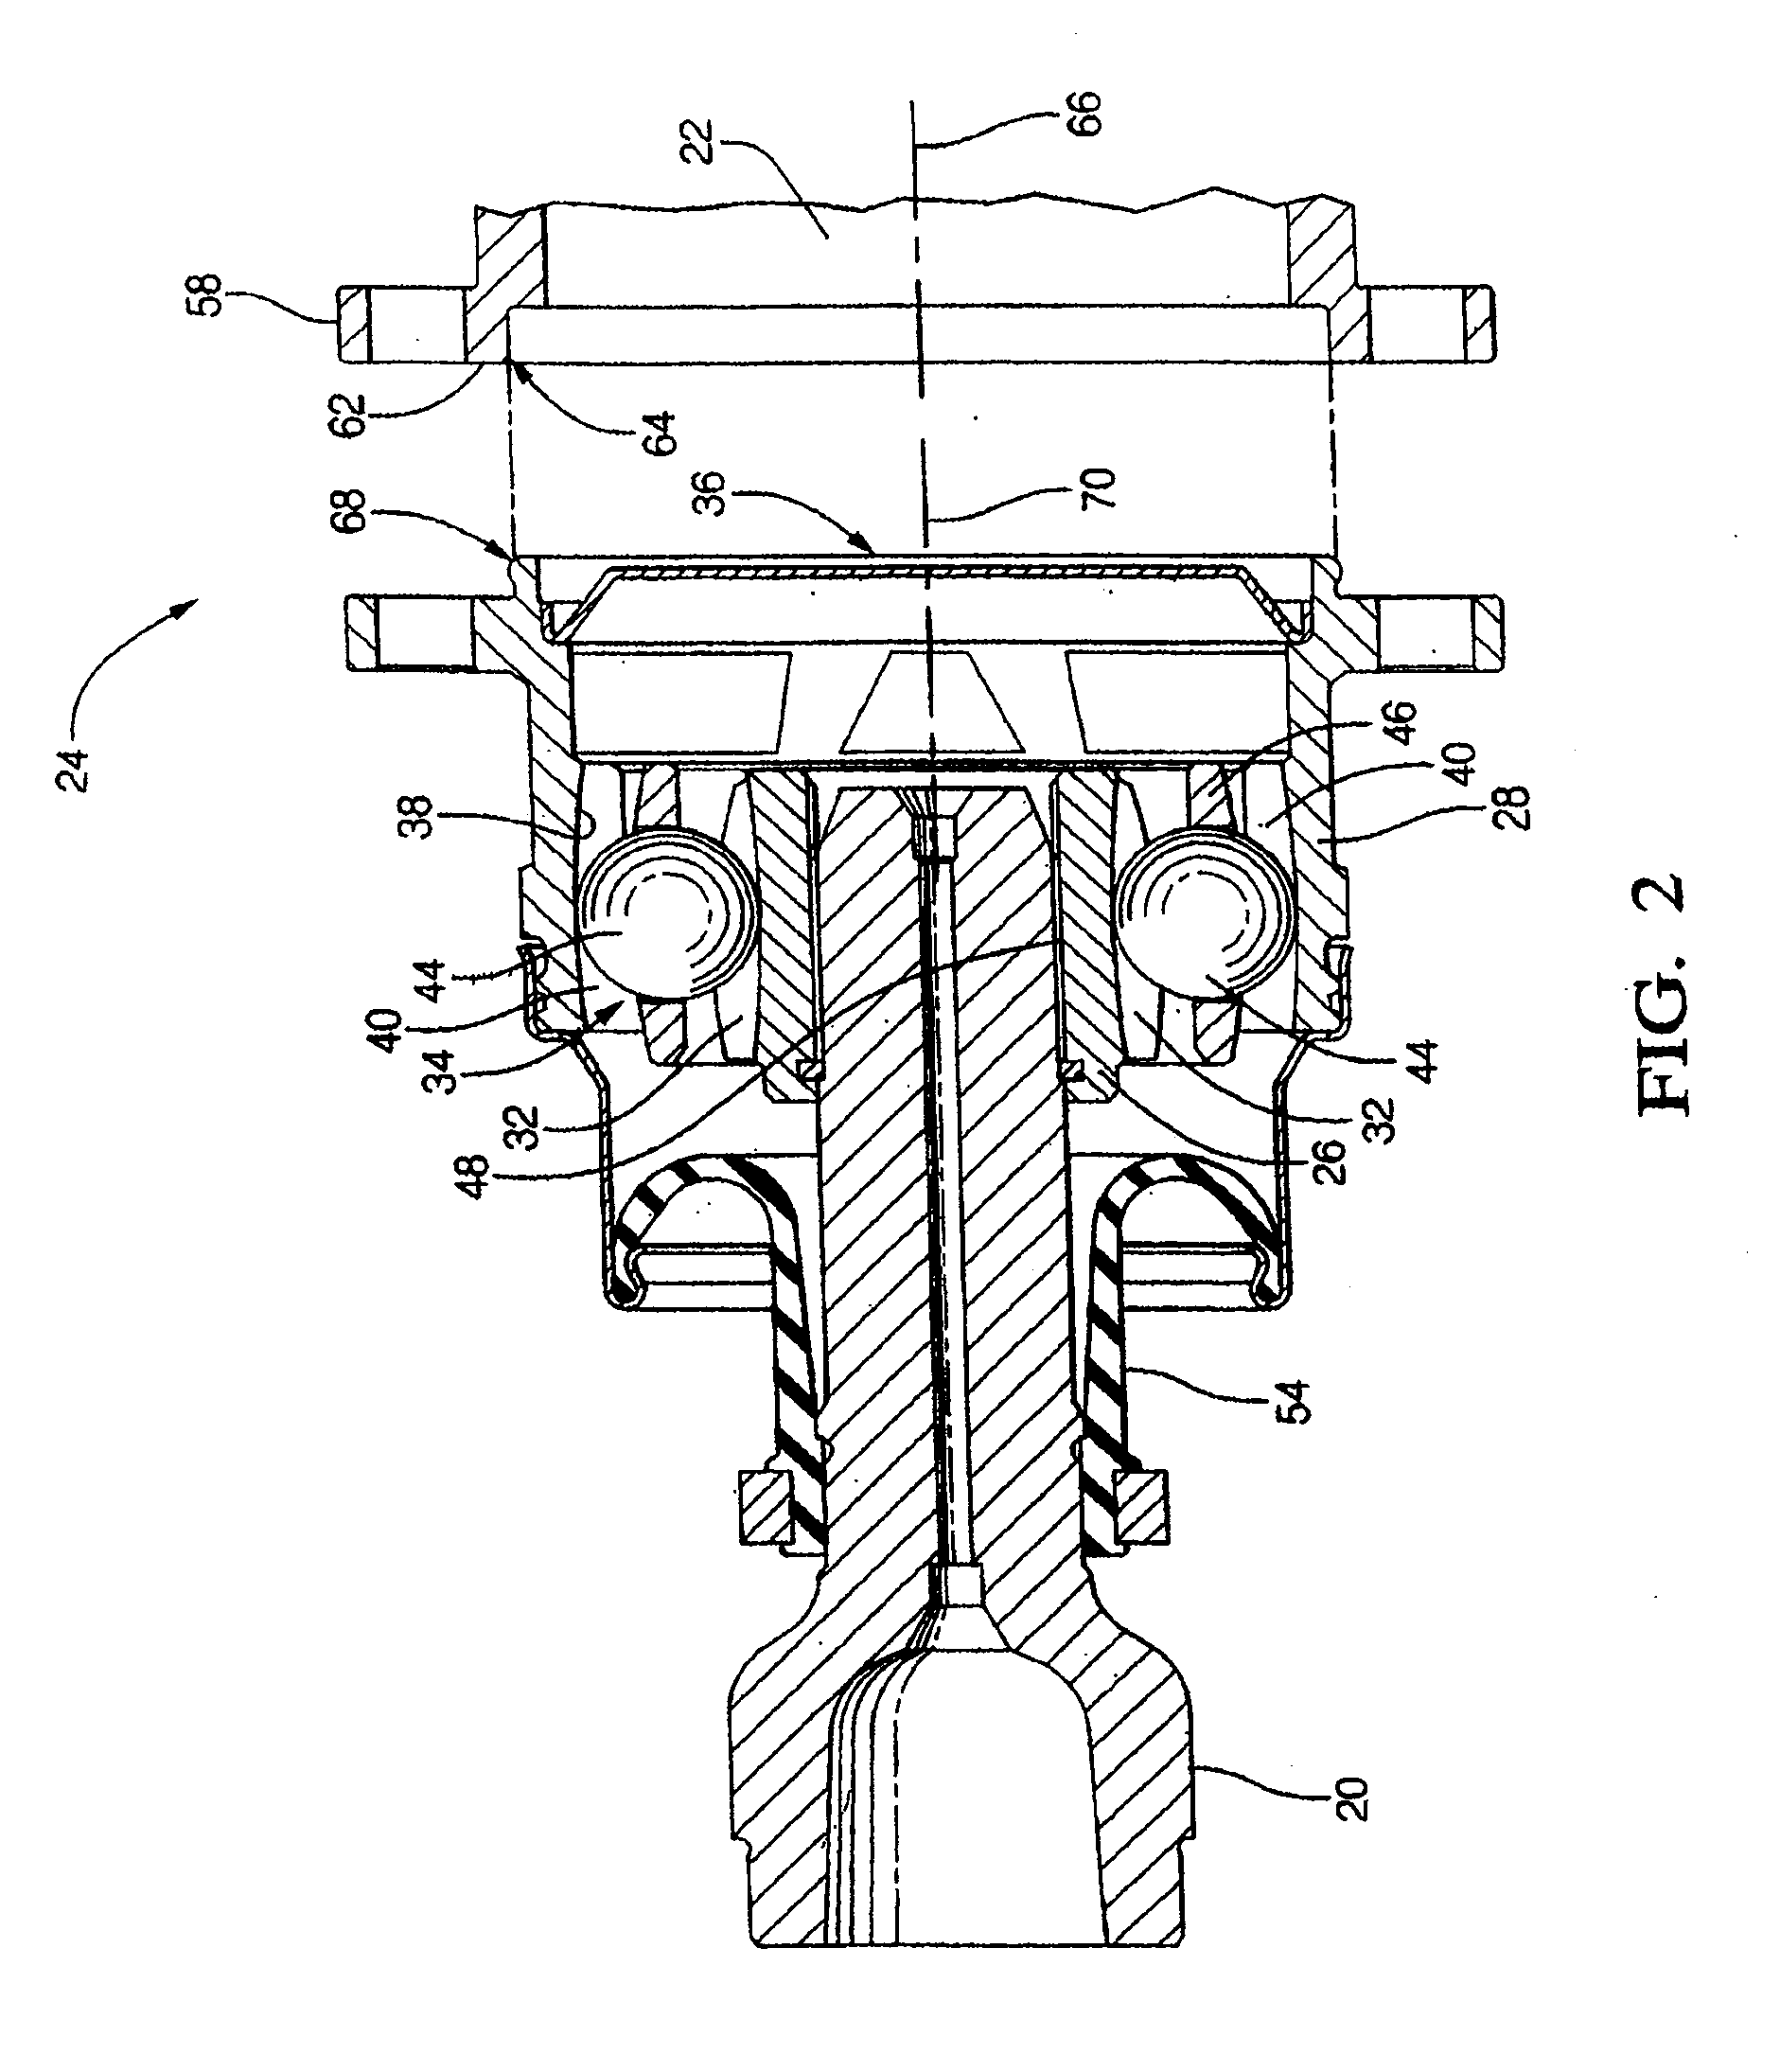 Joint assembly with centering flange